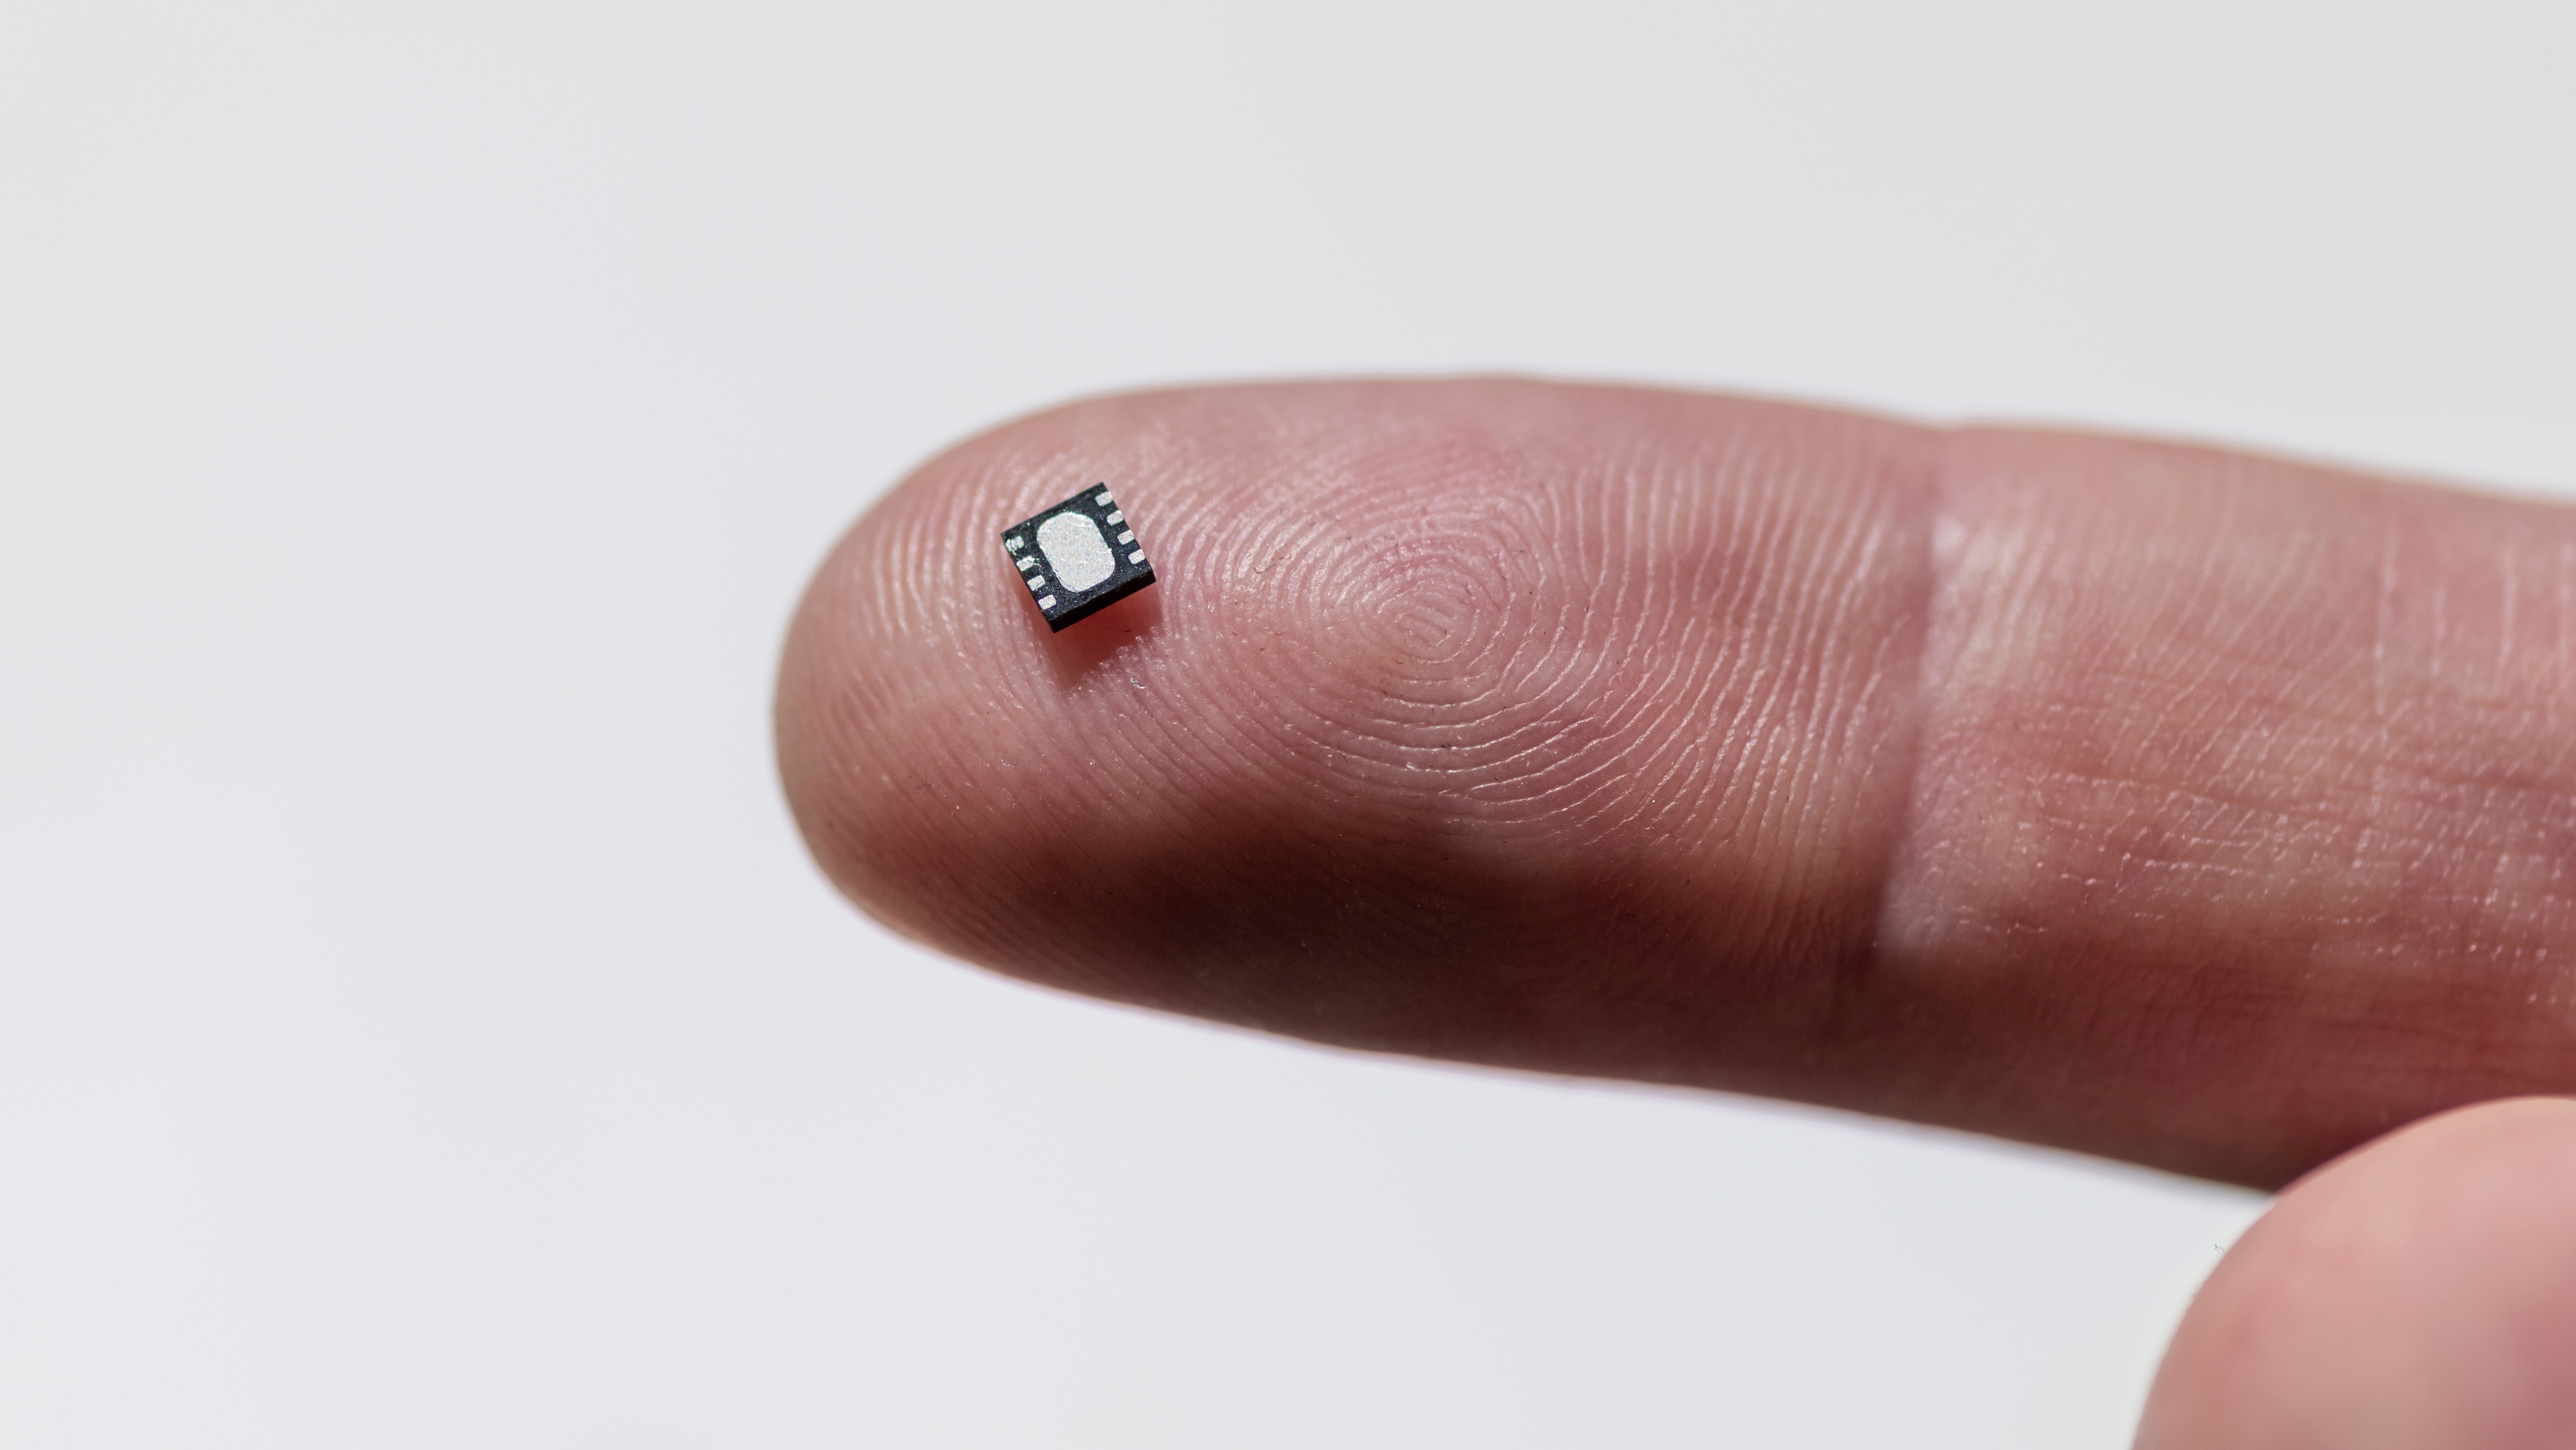 Close up of electronic microchip on human finger